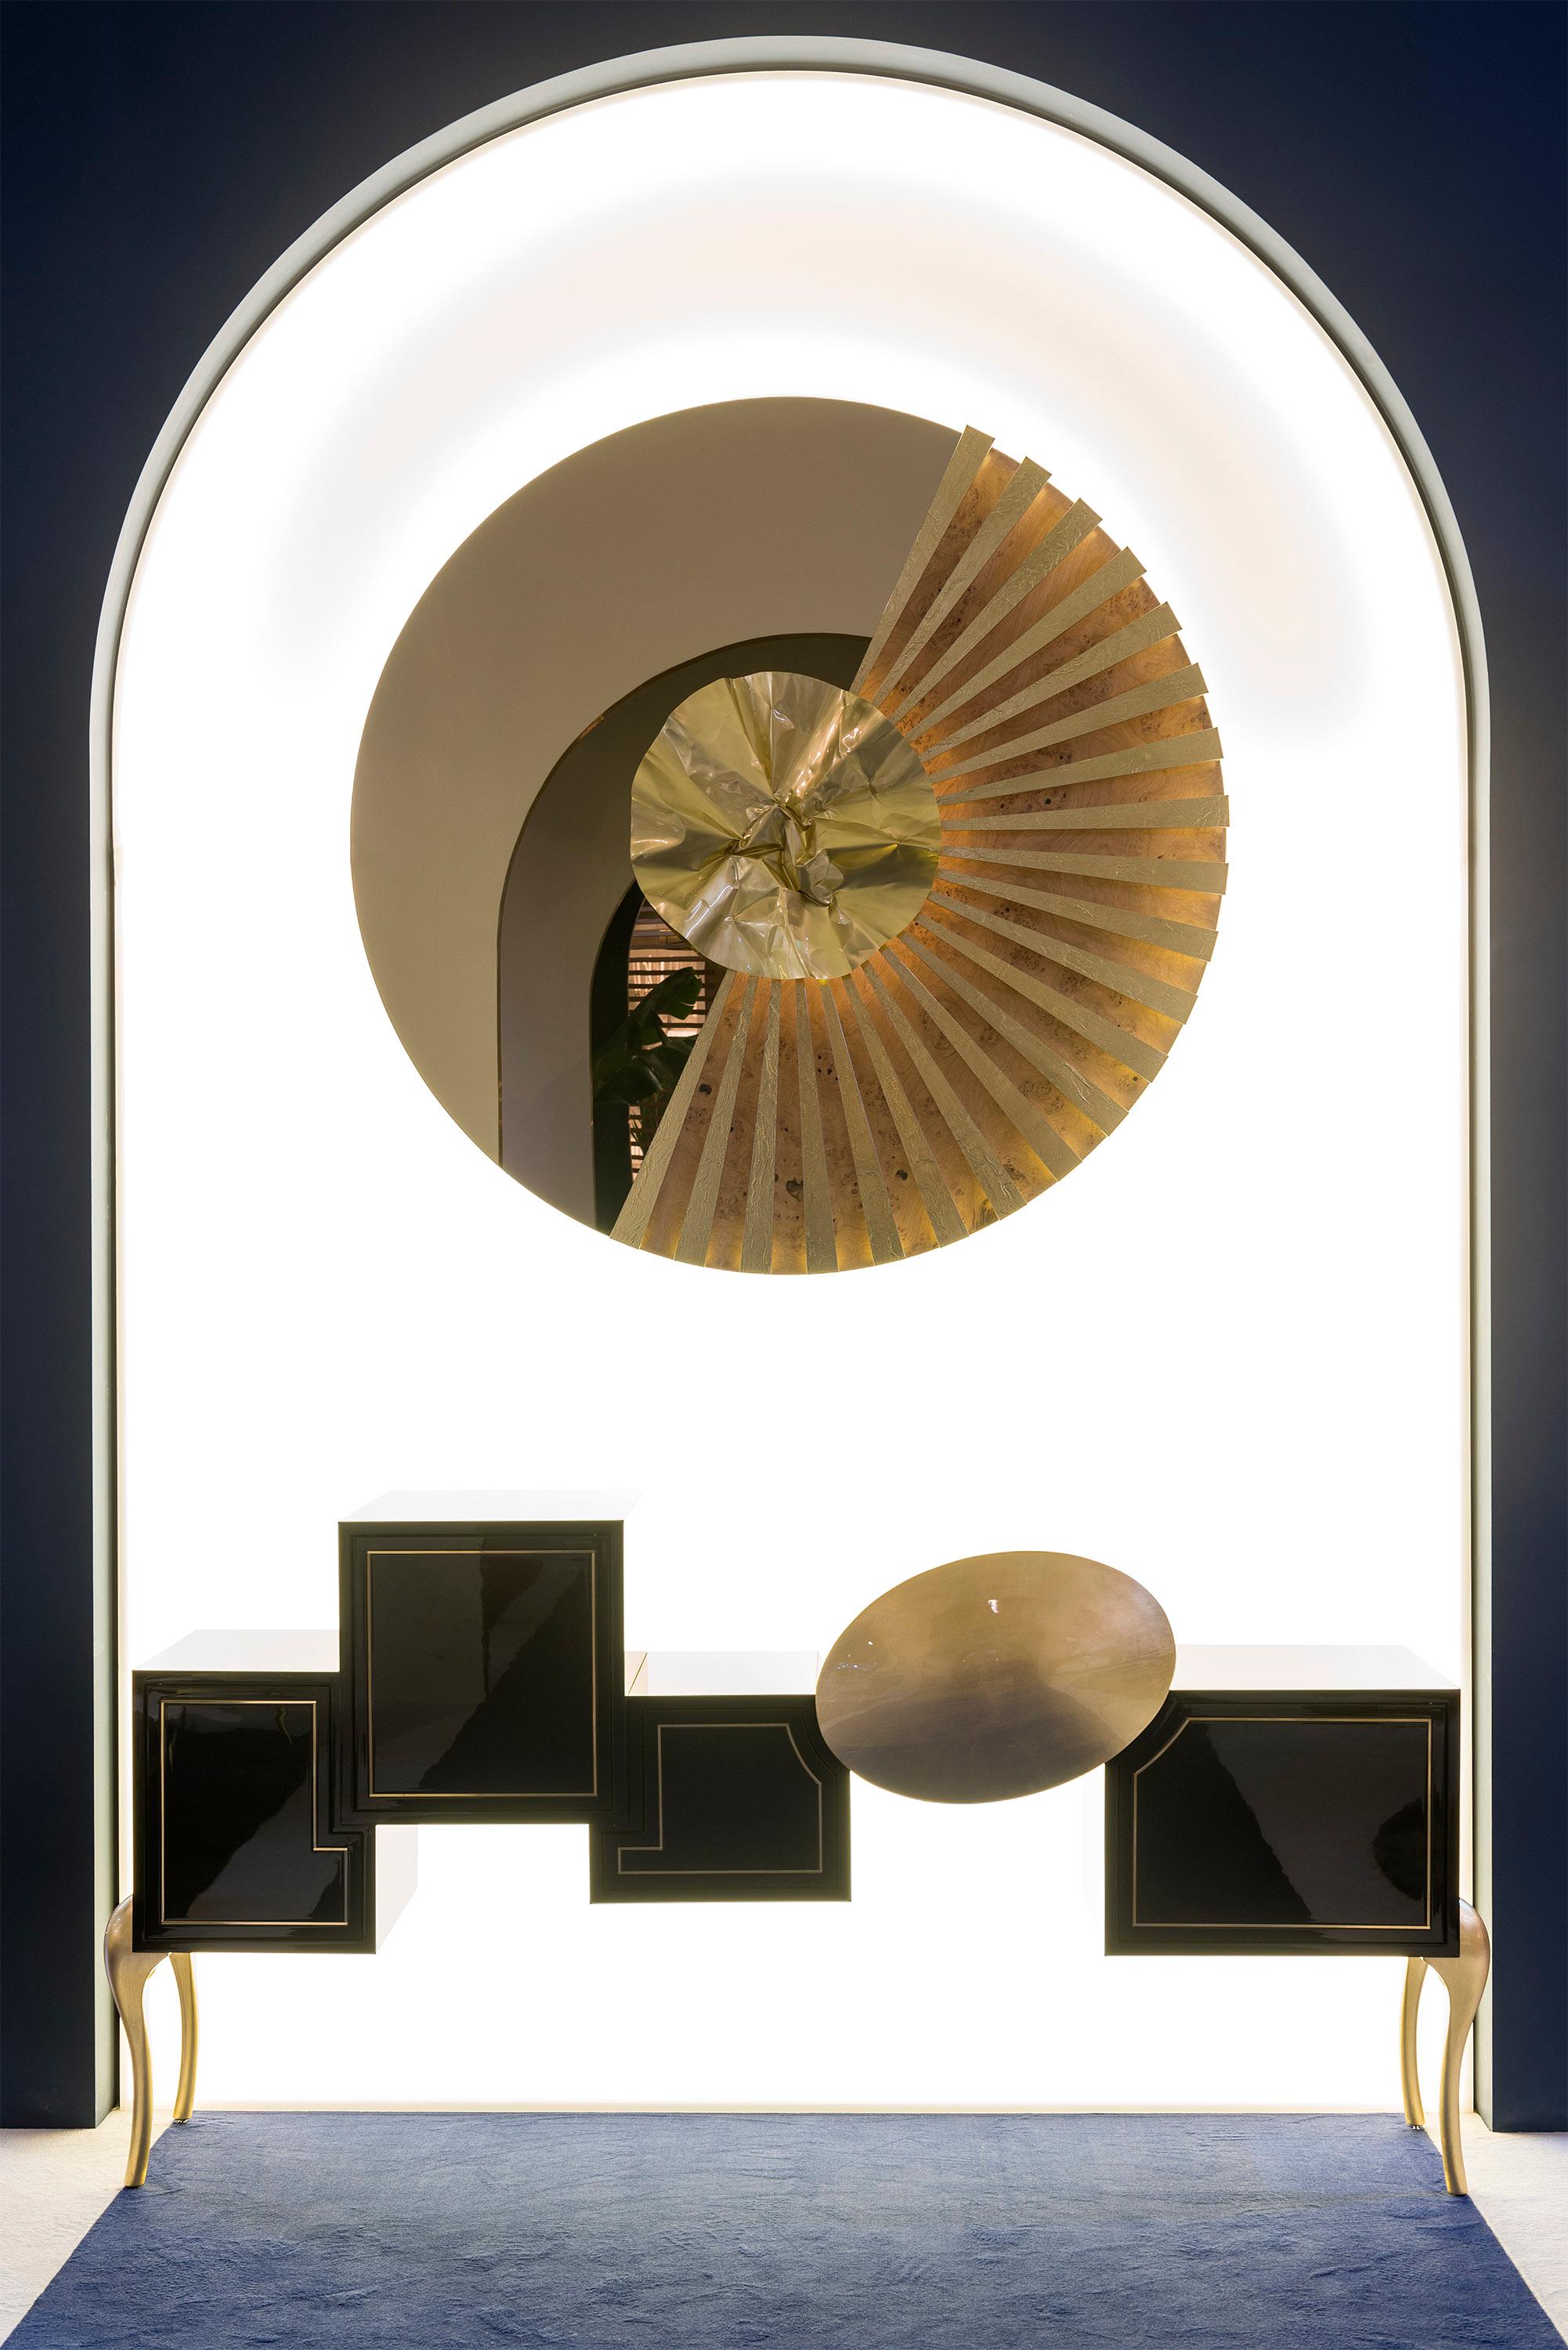 Solar Wall Mirror, Contemporary Collection, Handcrafted in Portugal - Europe by Greenapple.

The Solar modern wall mirror evokes mesmerising golden sunsets with its warm and bright allure. A reflection of meticulous craftsmanship and nature’s